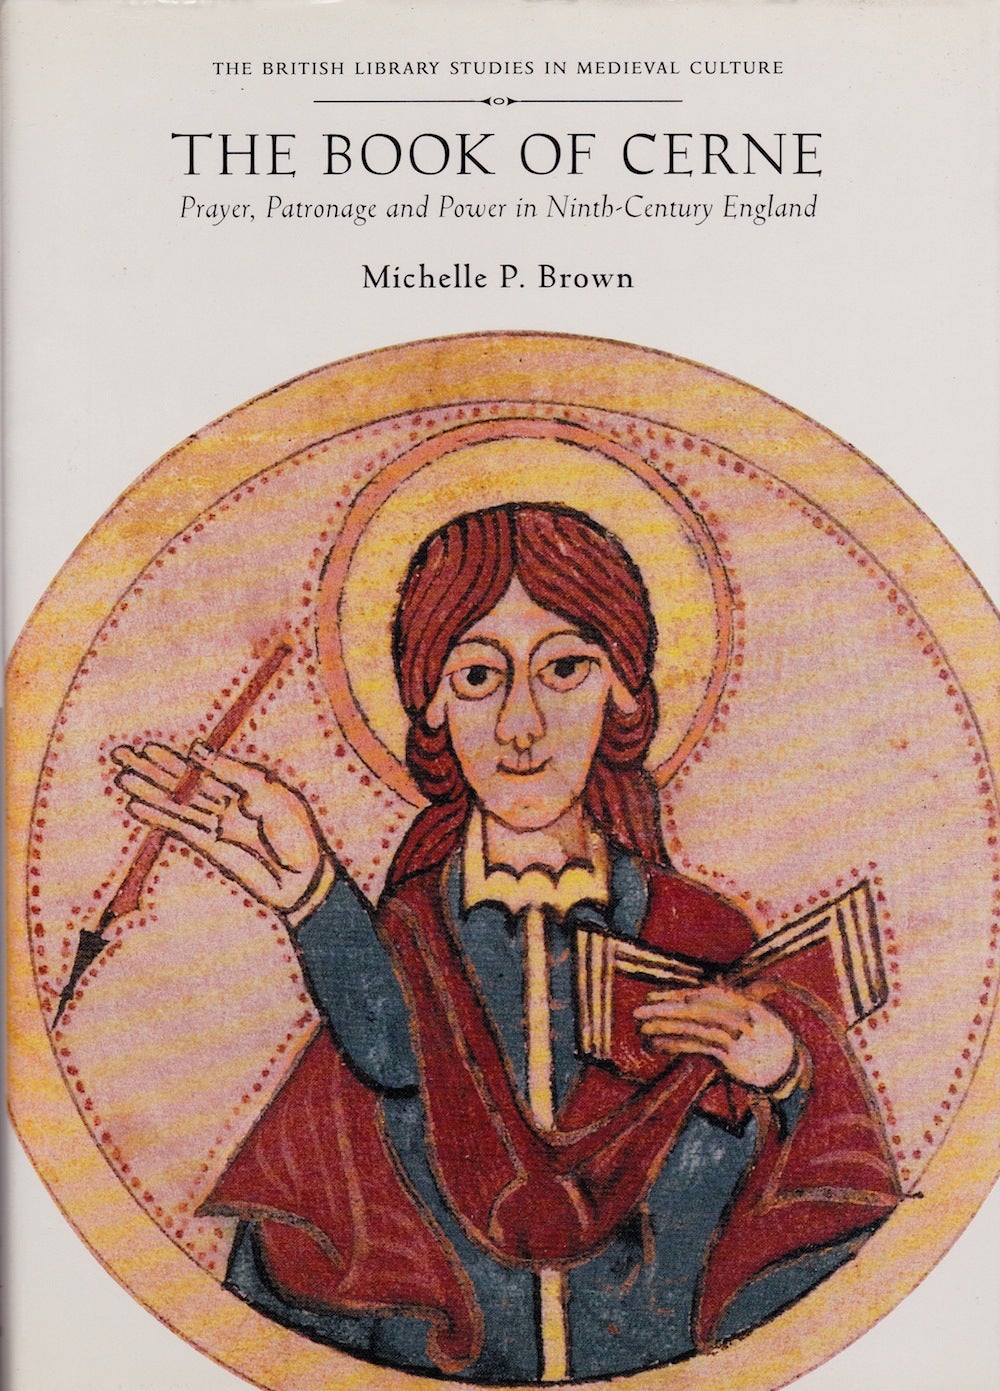 IN　P.　ENGLAND　OF　PATRONAGE　Michelle　CERNE:　PRAYER,　CENTURY　AND　NINTH　POWER　Brown　THE　BOOK